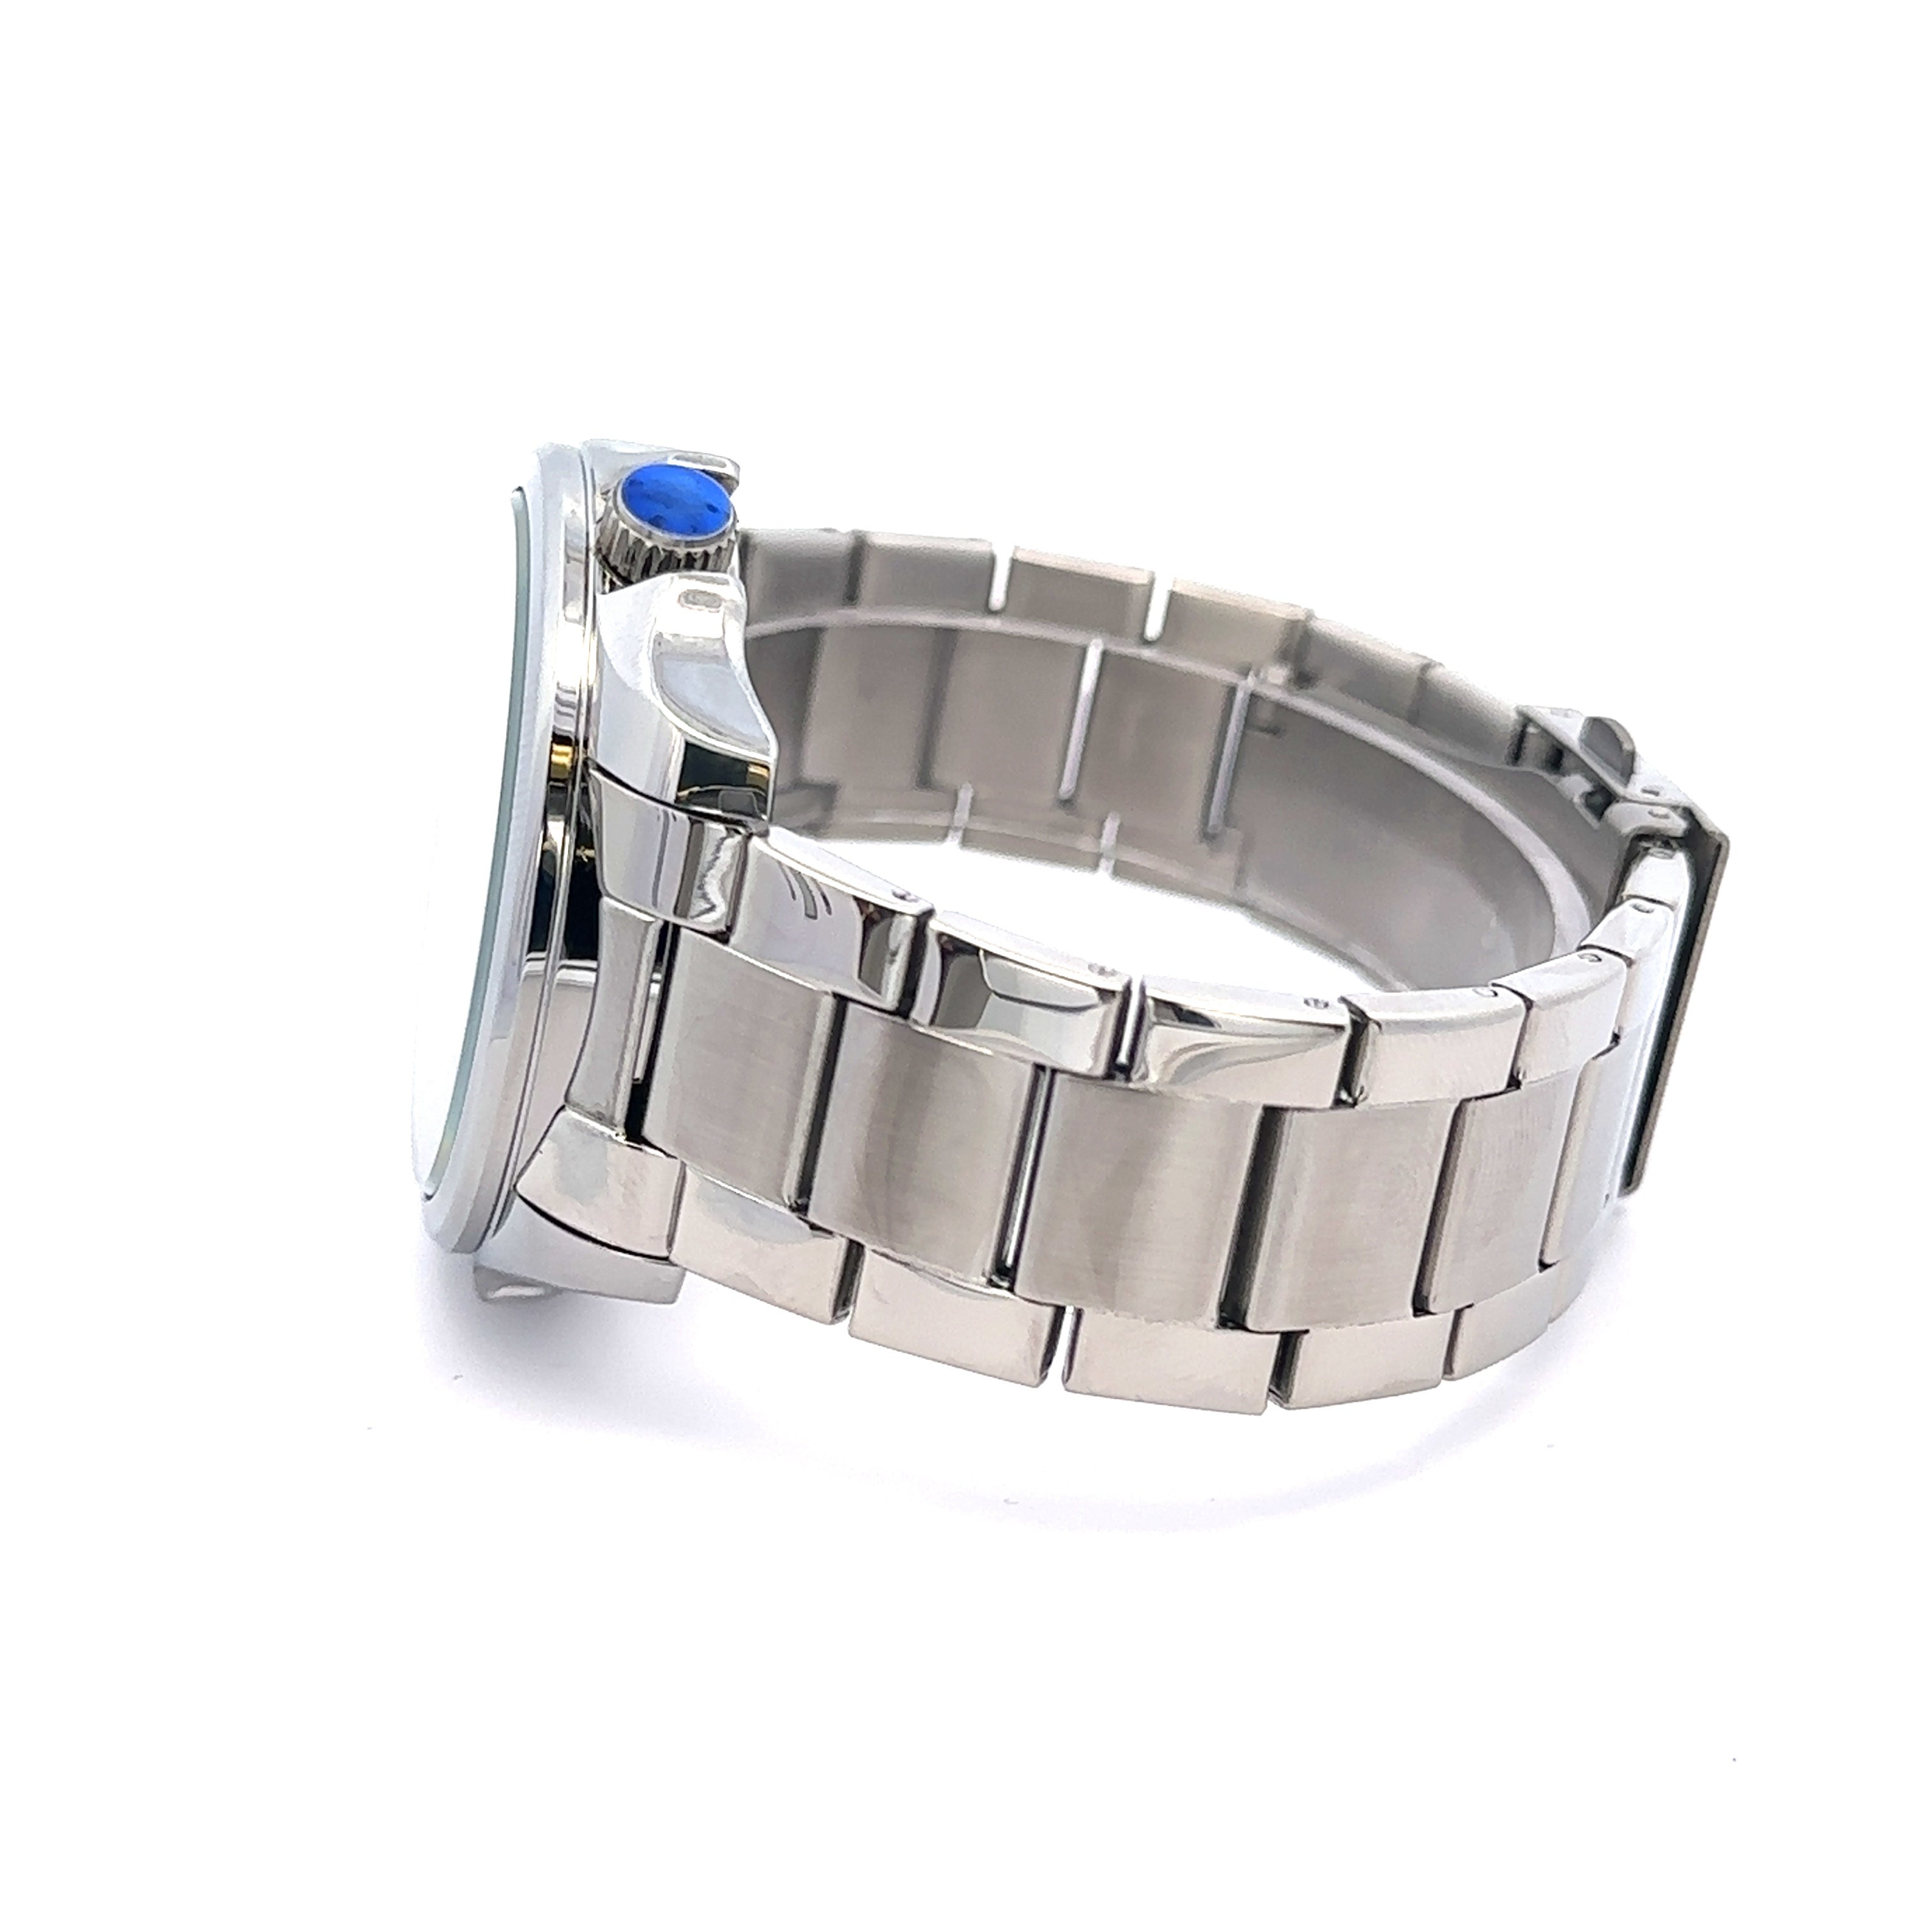 VESTIGE METAL BACK BLUE STAINLESS ICED OUT WATCH I 5517913